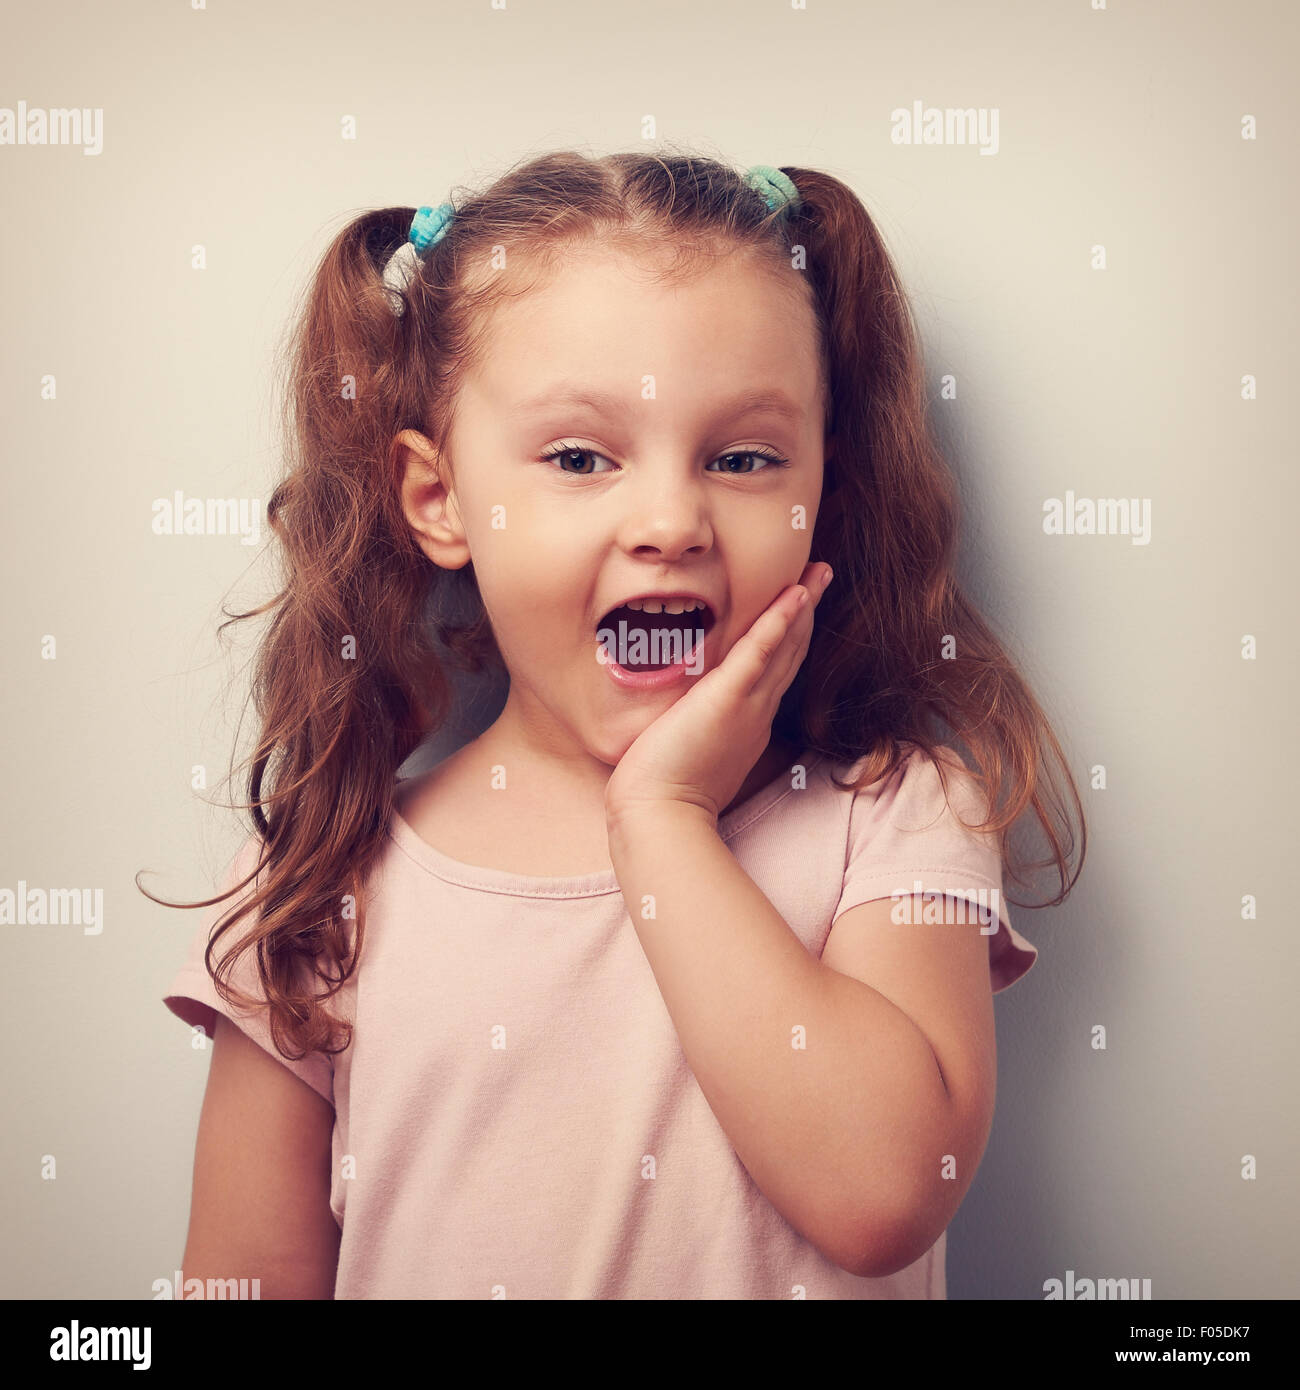 Surprising fun girl looking with open mouth. Vintage closeup portrait Stock Photo